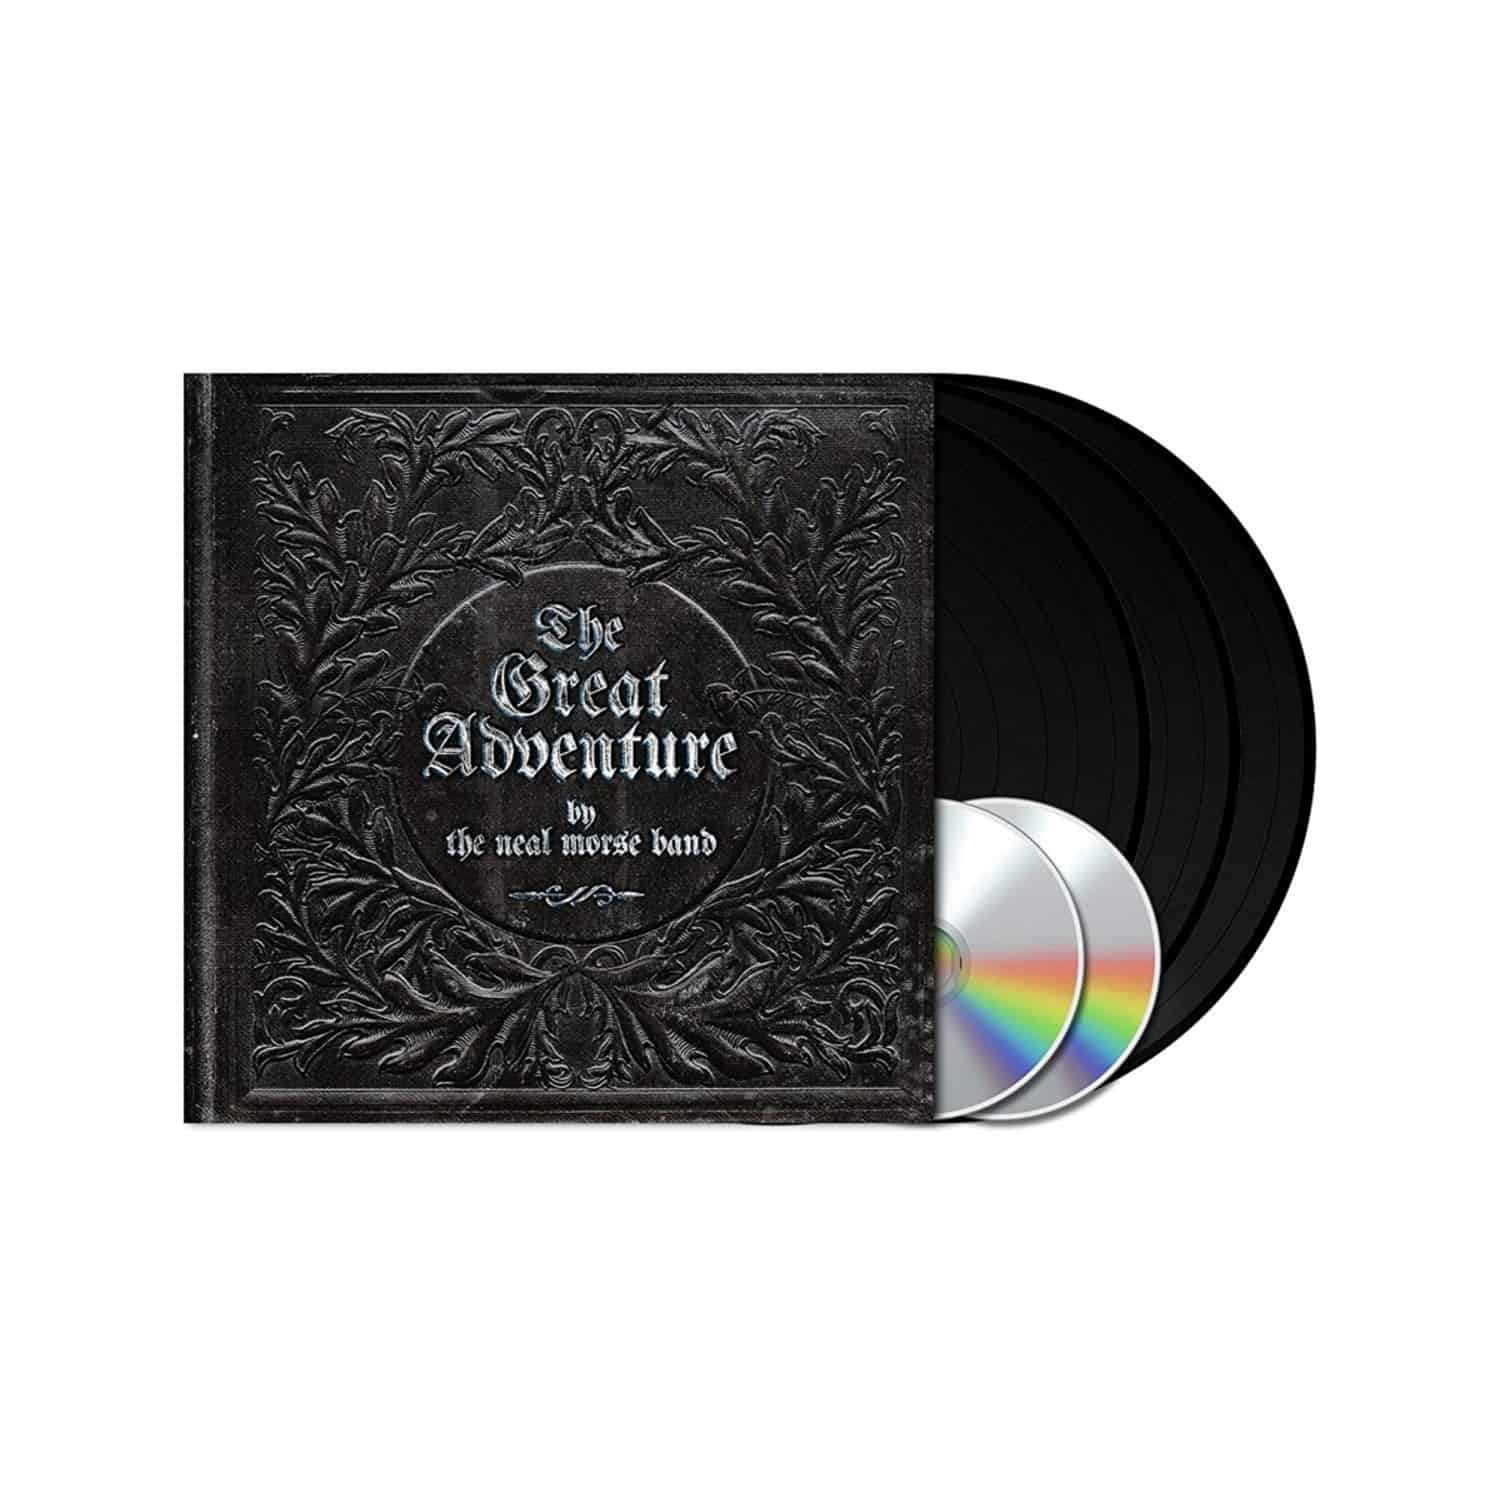 The Neal Morse Band - THE GREAT ADVENTURE 